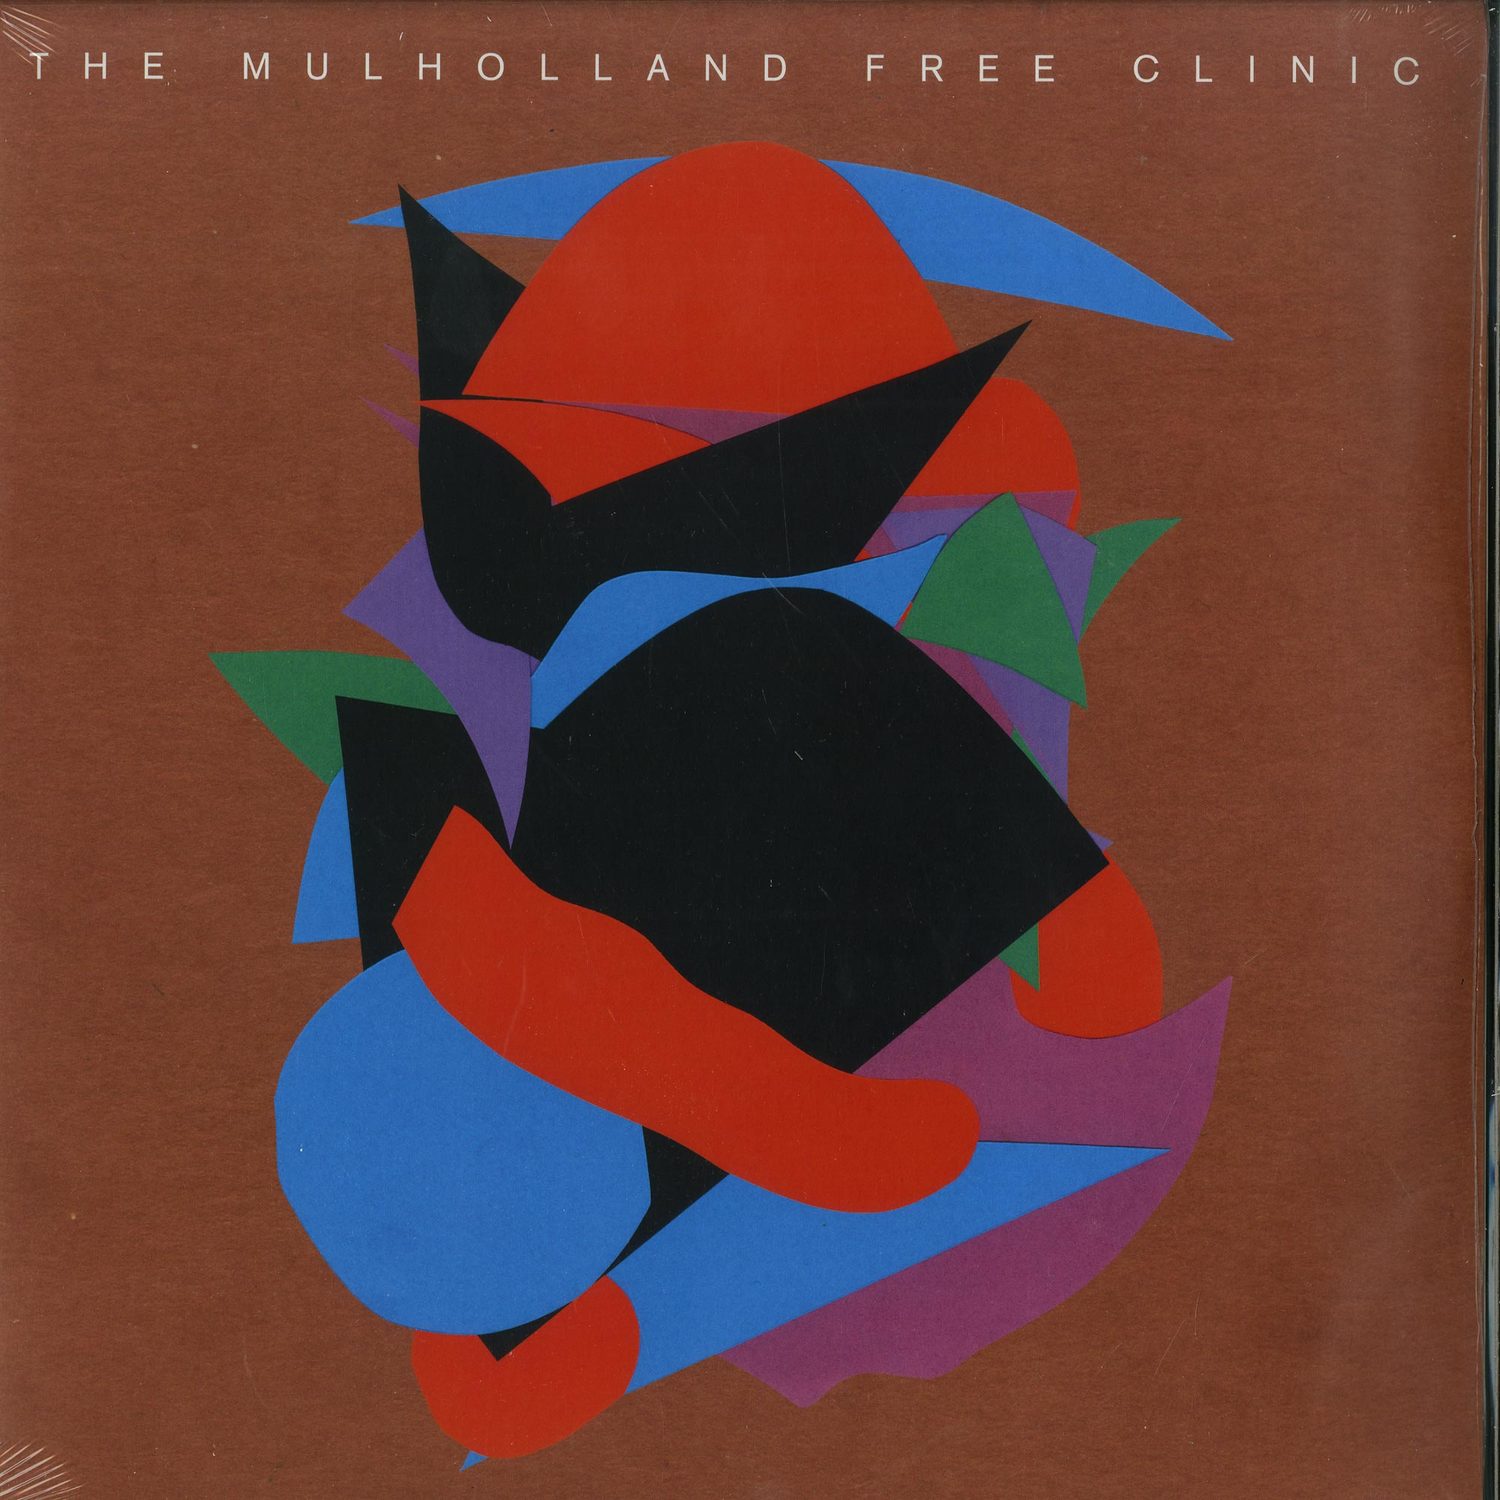 The Mulholland Free Clinic  - THE MULHOLLAND FREE CLINIC 